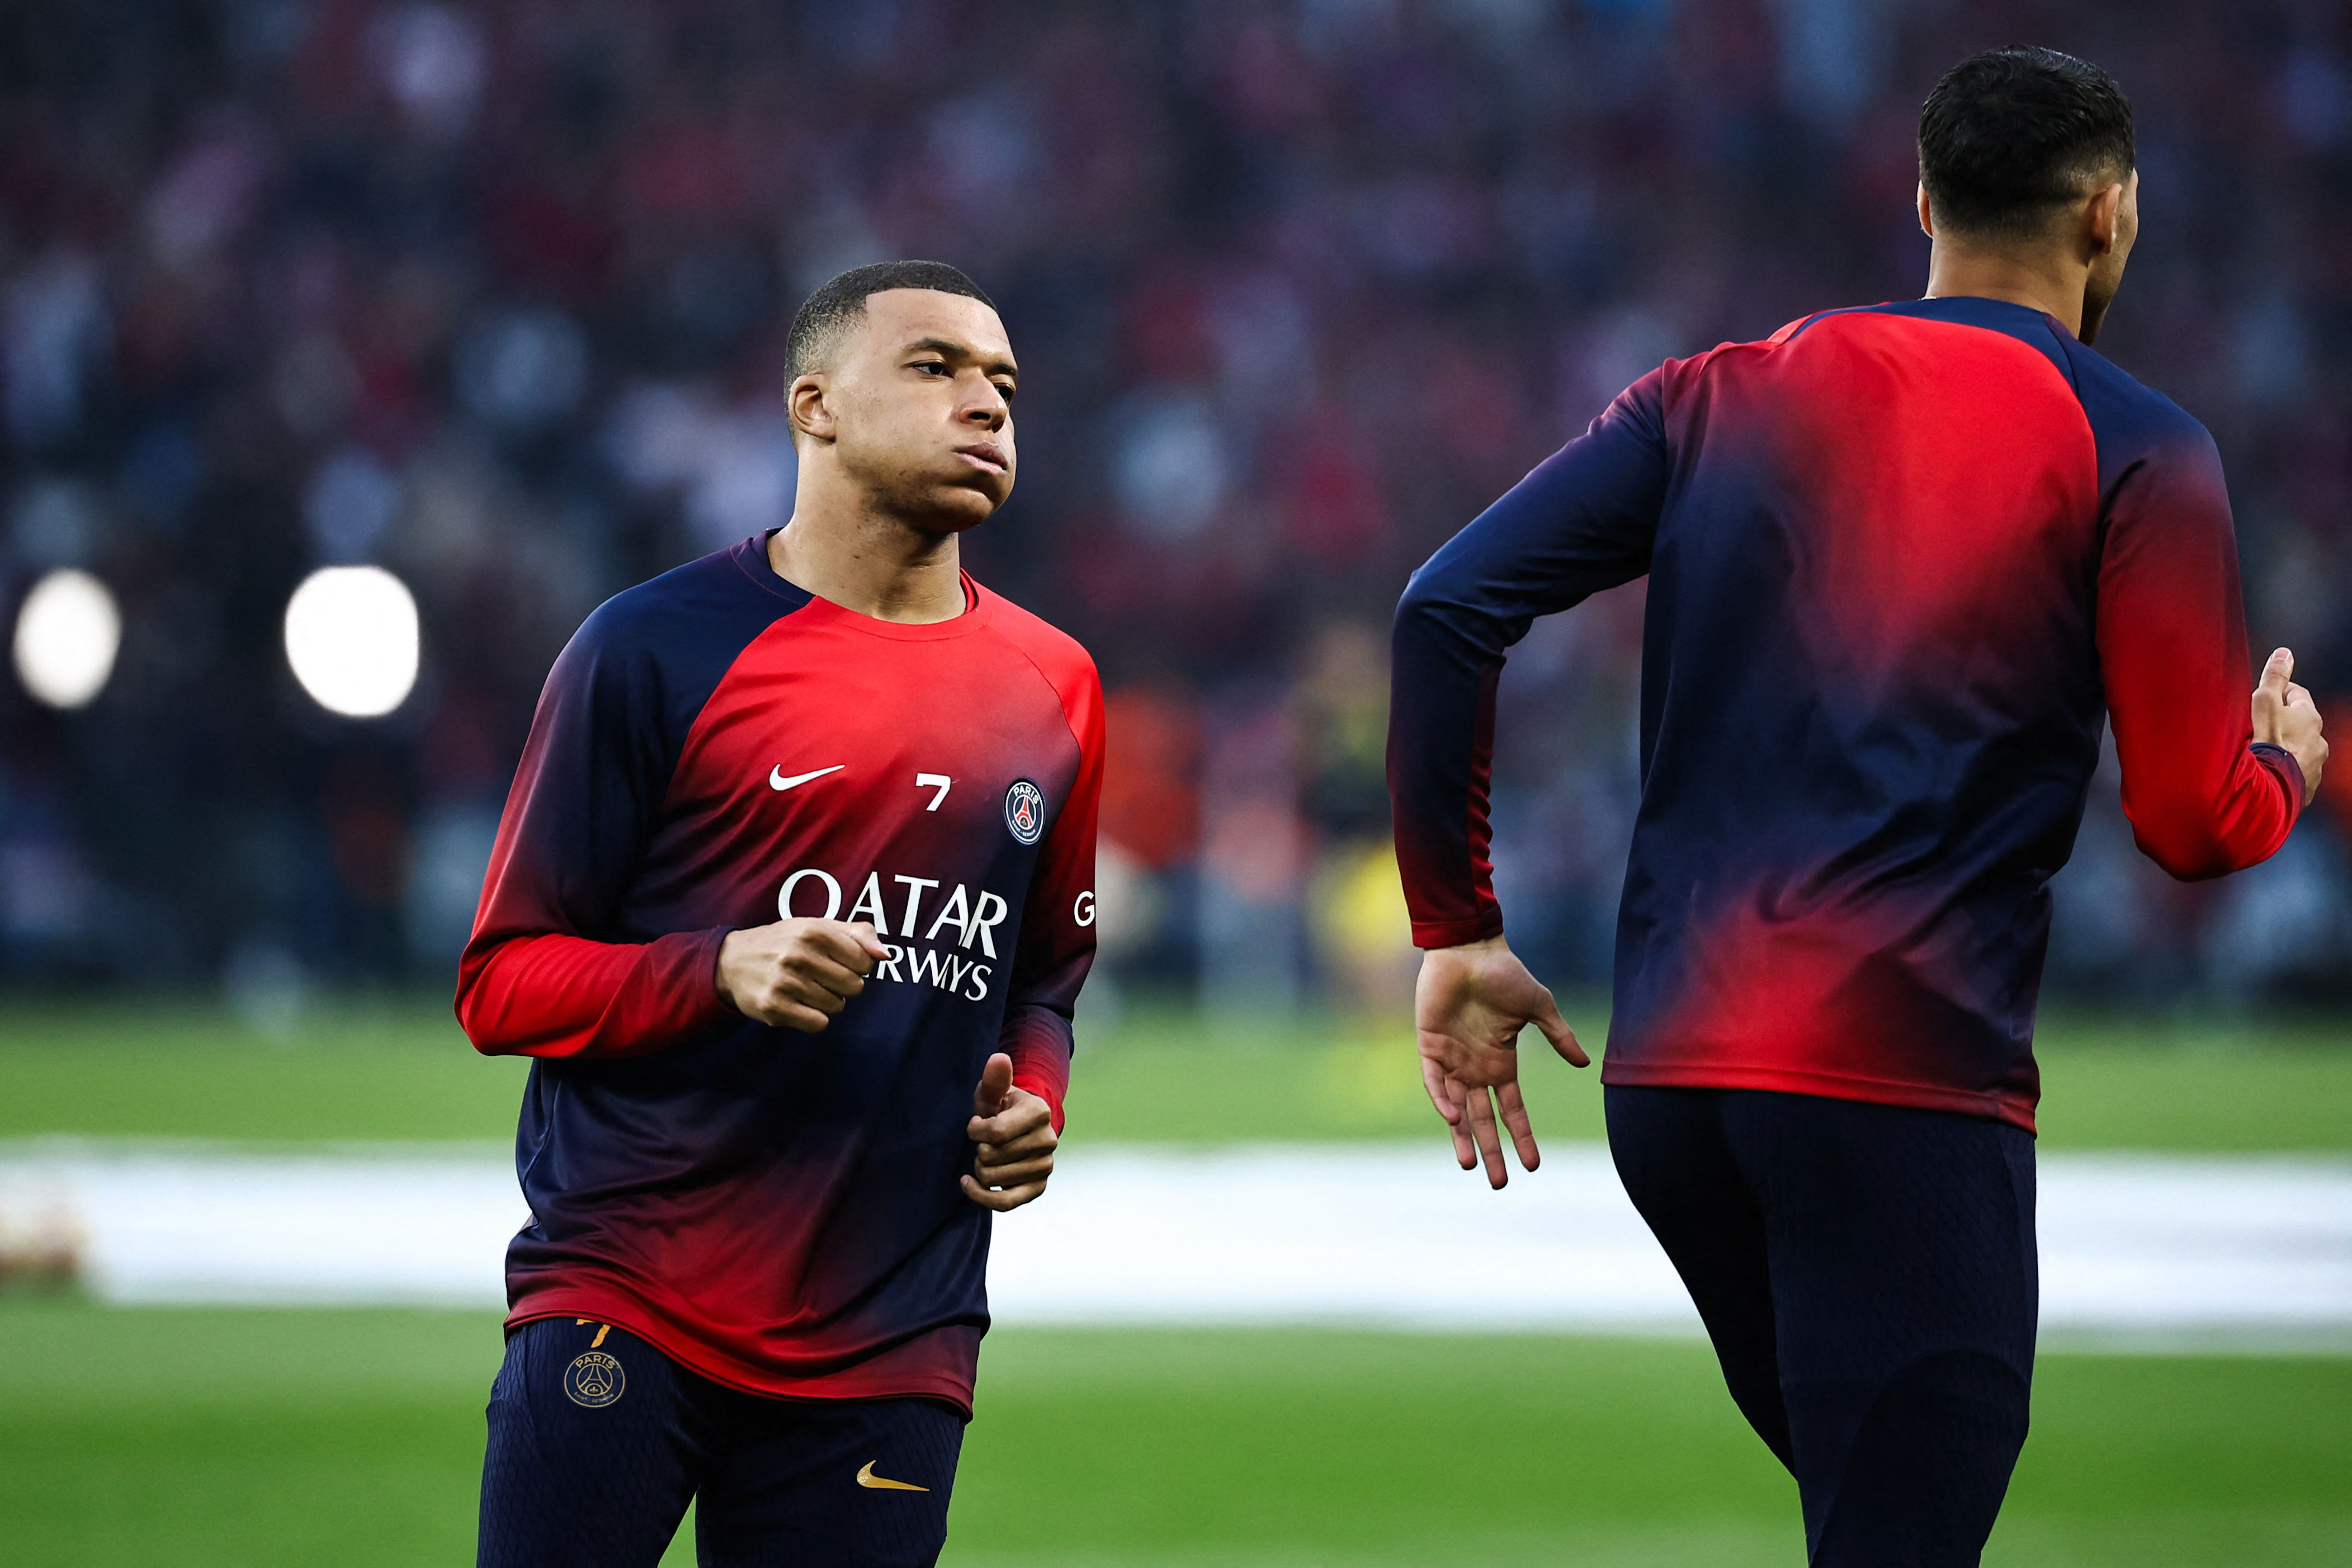 psg vs dortmund live! champions league result, match stream and latest updates today